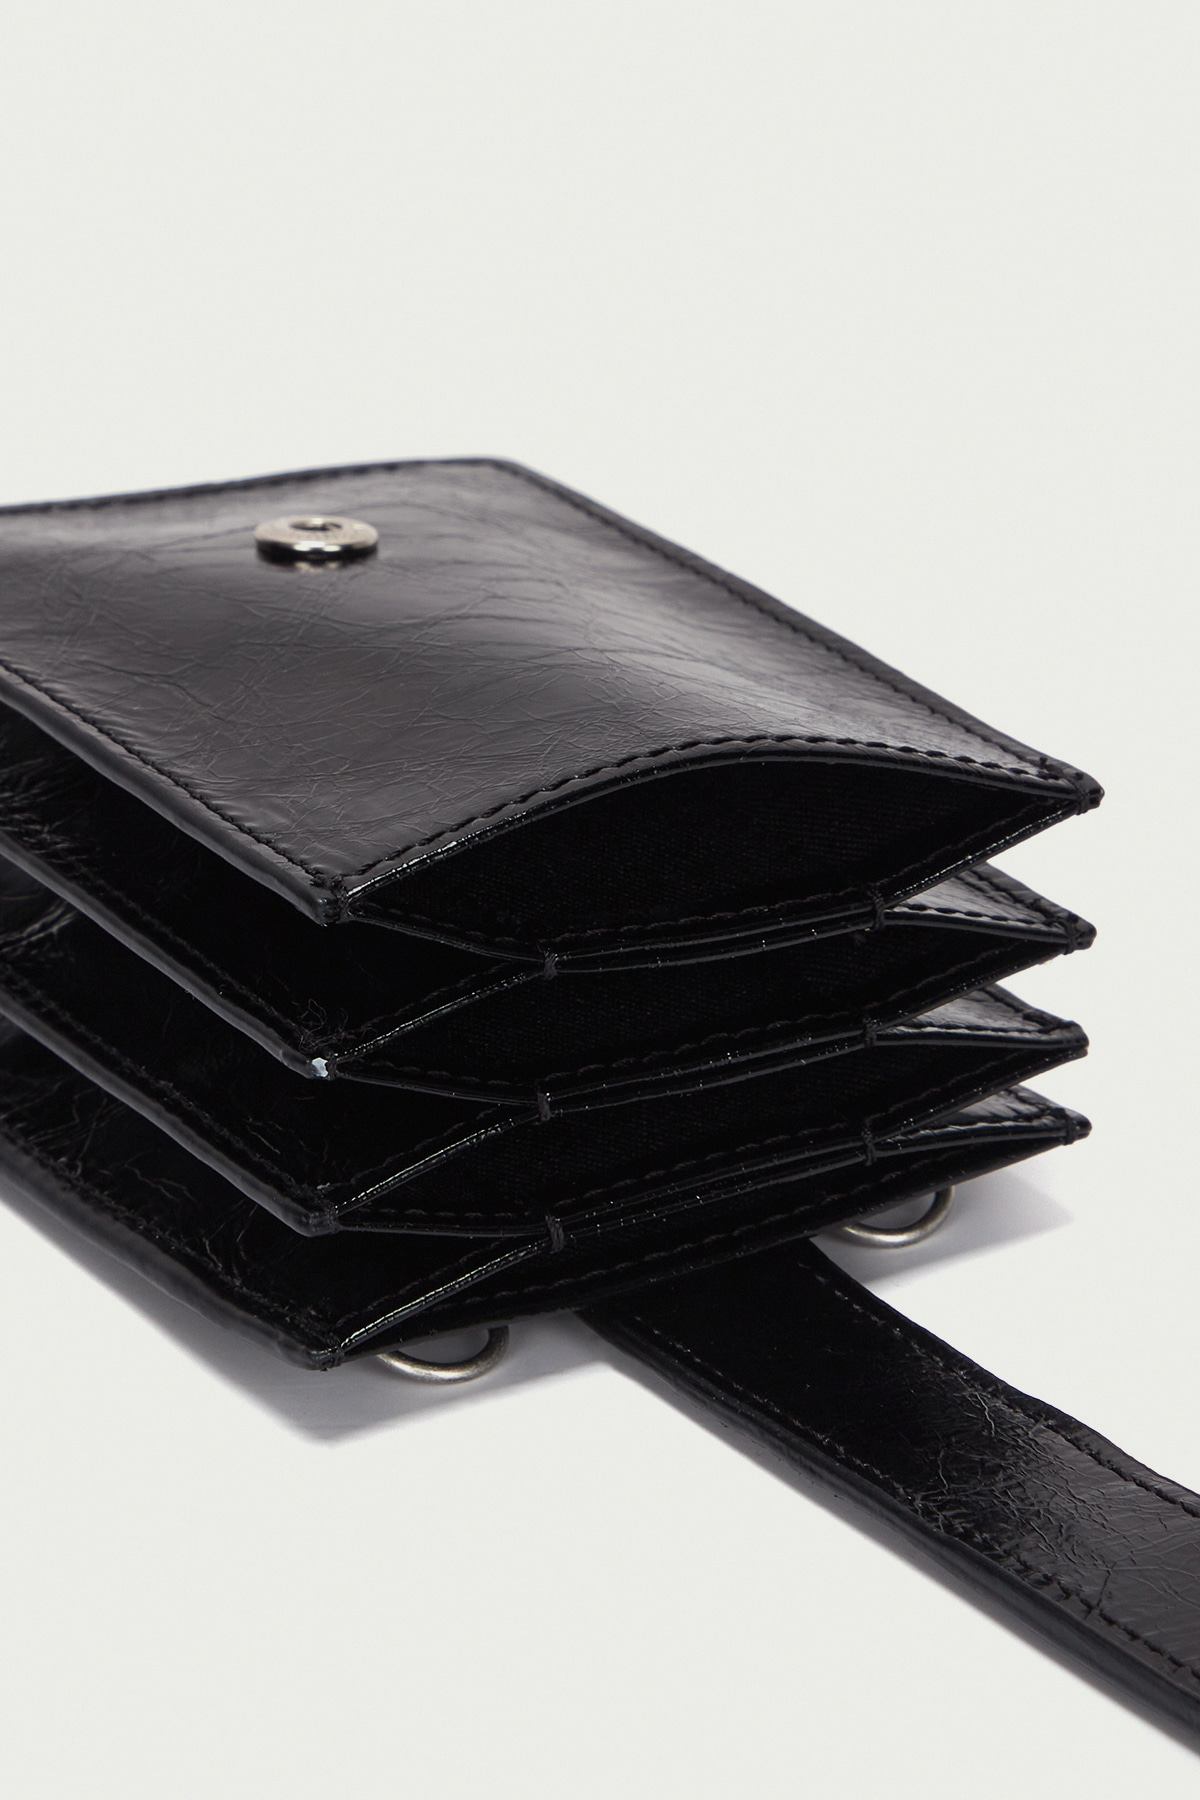 ACCORDION NECKLACE WALLET IN BLACK - MATINKIM